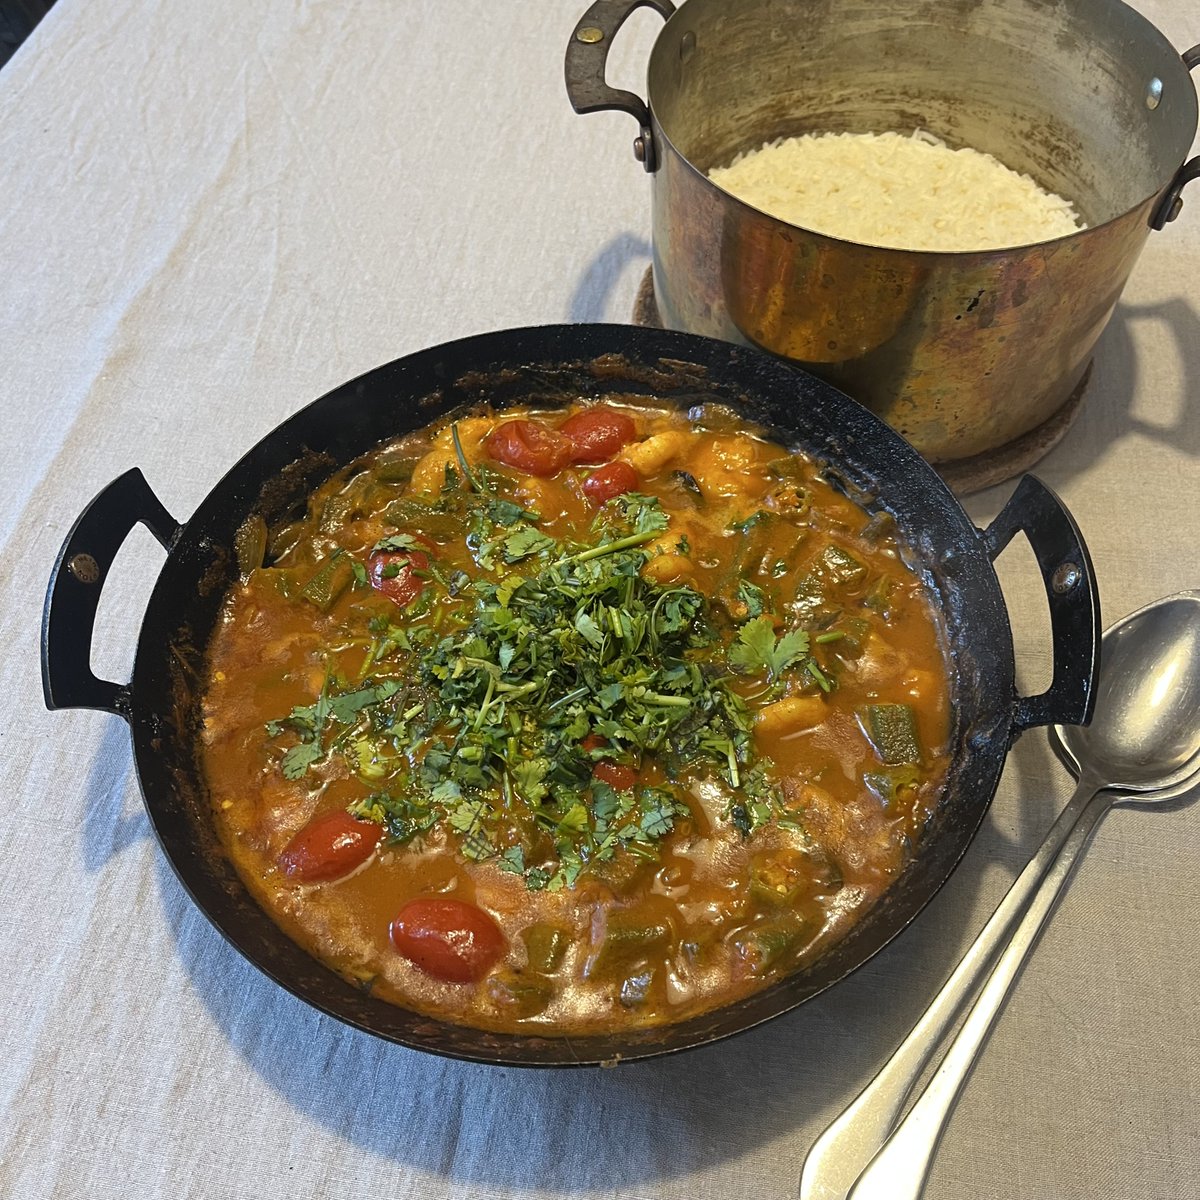 Delicious okra and prawn curry, recipe by @abrowntable in VegTable. Curry cooked in one of our prospector pans, rice in a copper stockpot netherton-foundry.co.uk